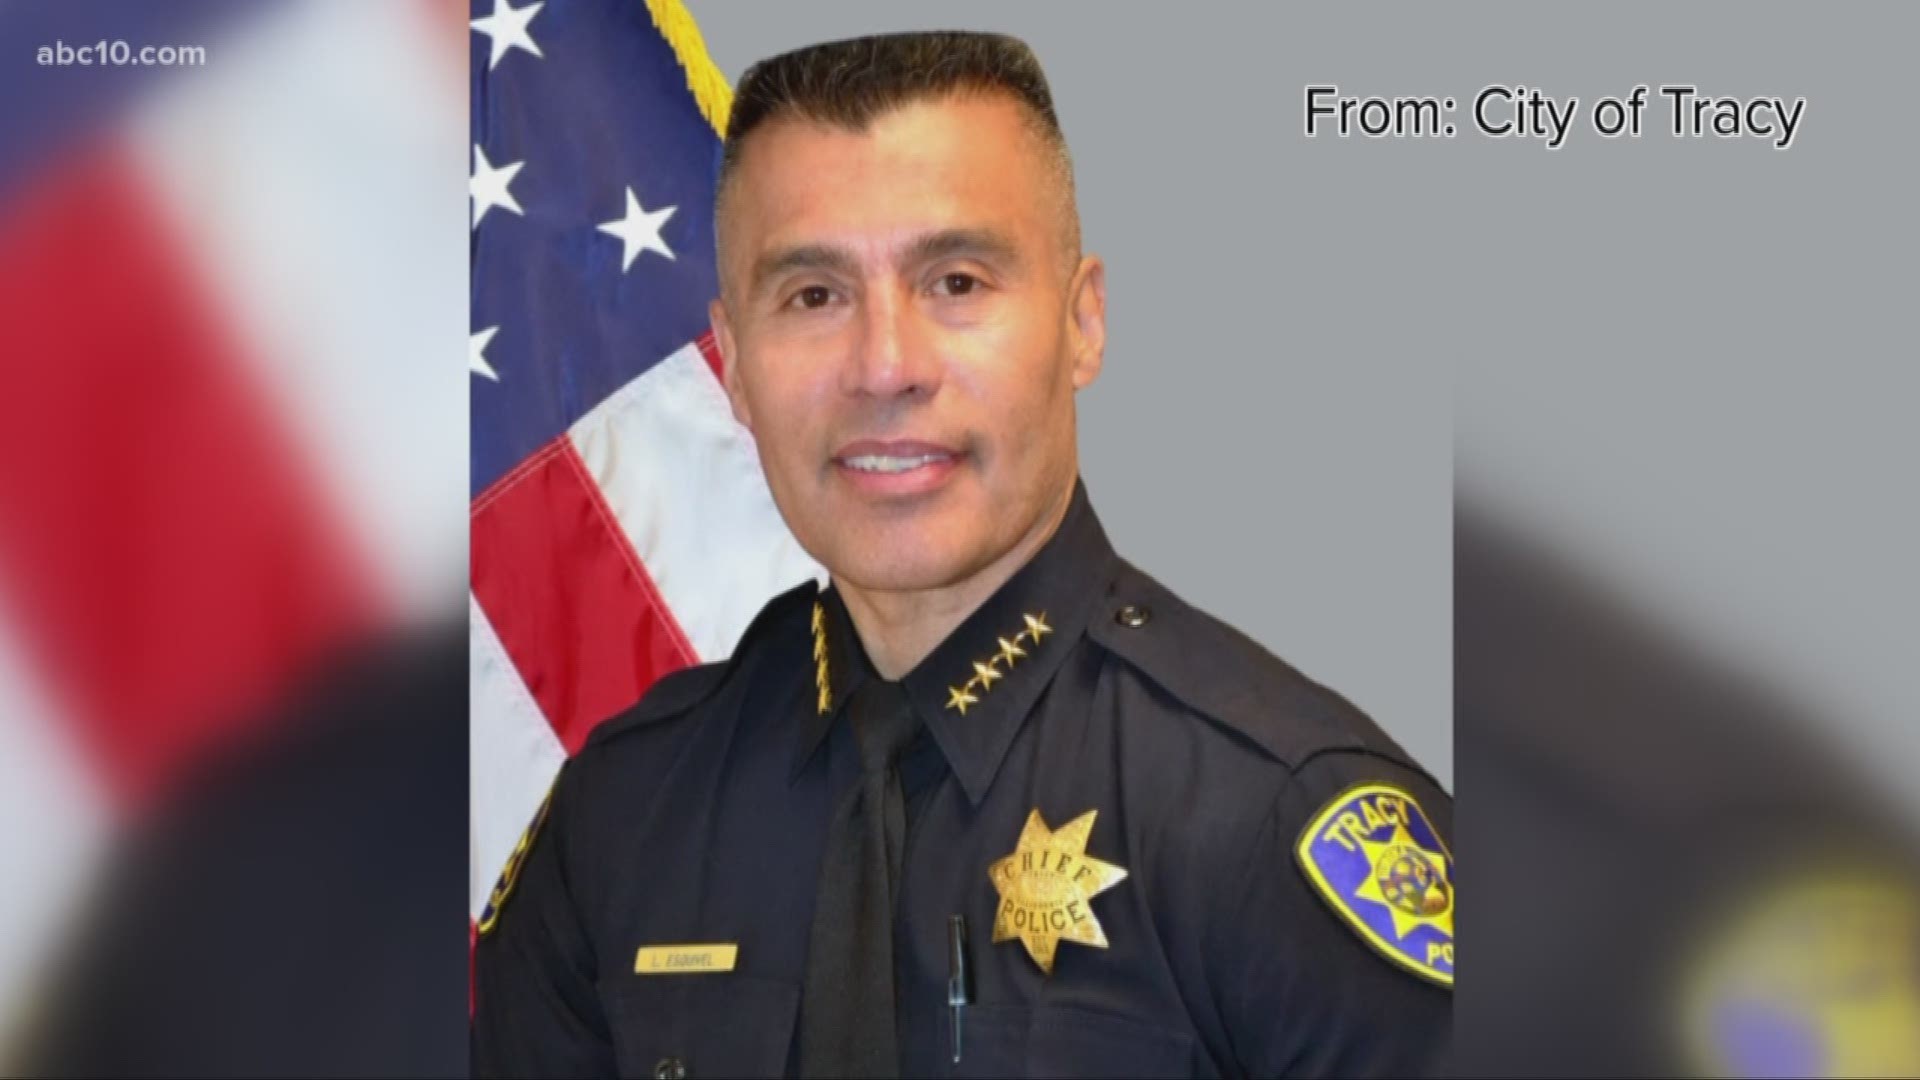 Tracy Police Chief Larry Esquivel Terminated Due To Personnel Matter